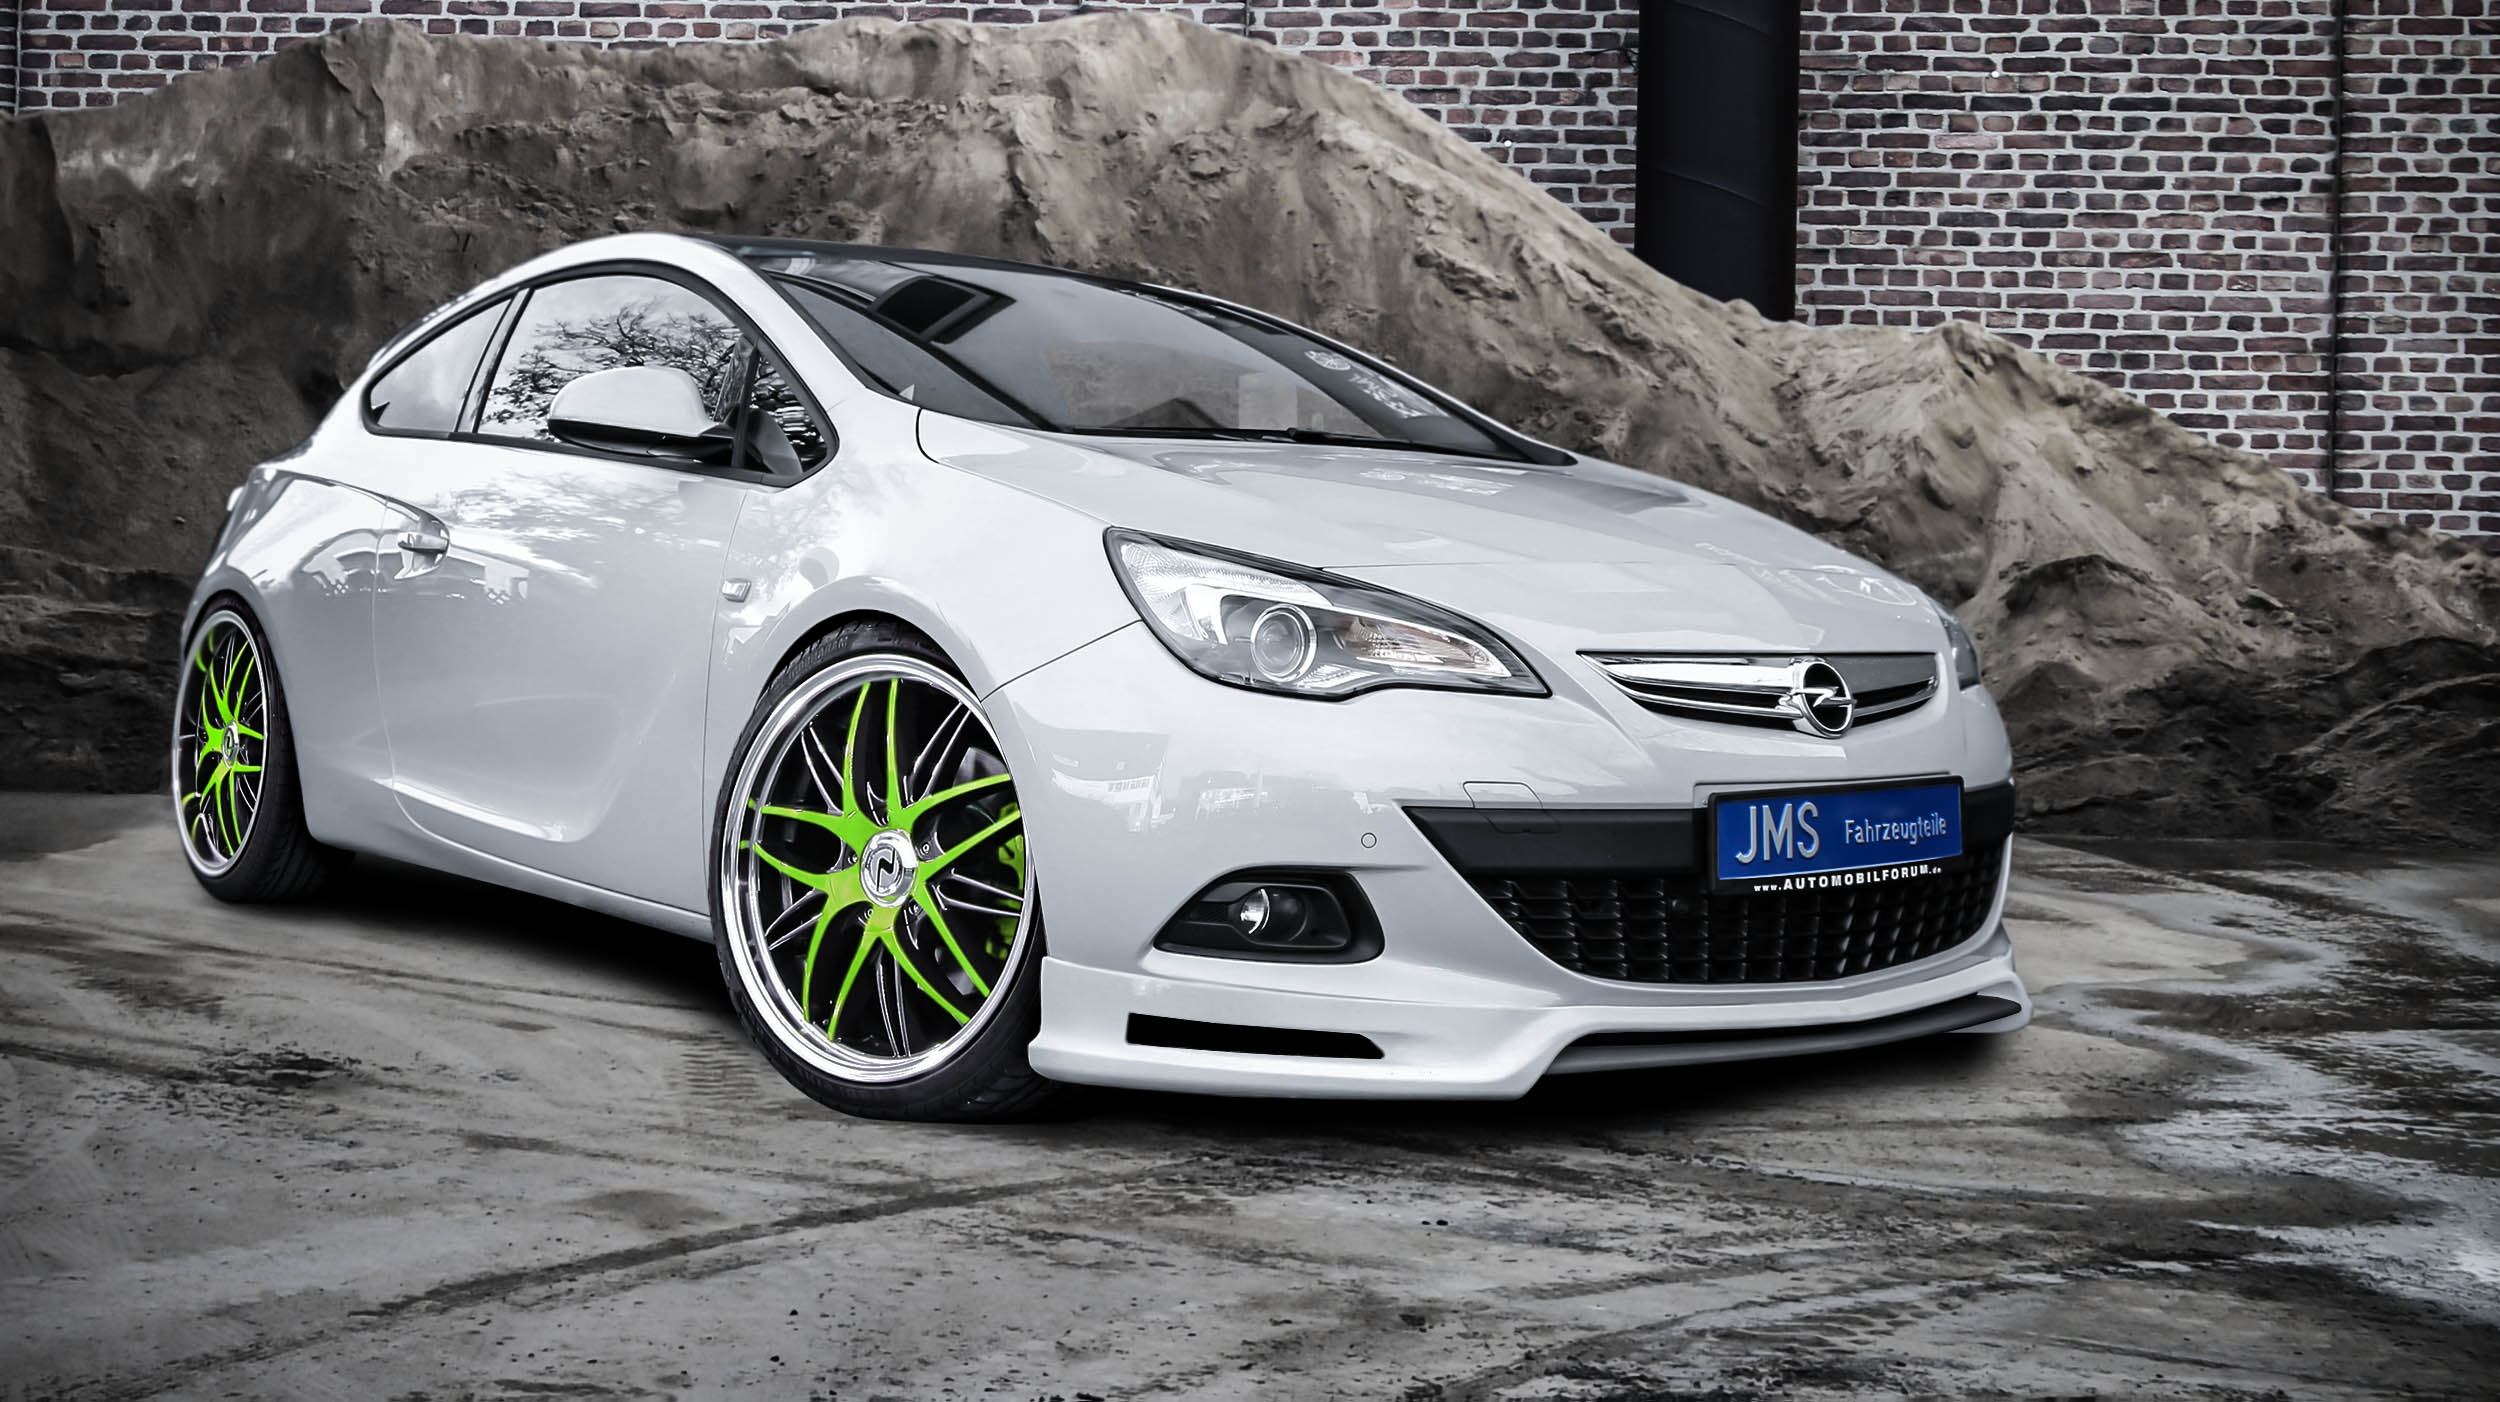 2013, Jms, Opel, Astra, J, Gtc, Coupe, Tuning Wallpaper